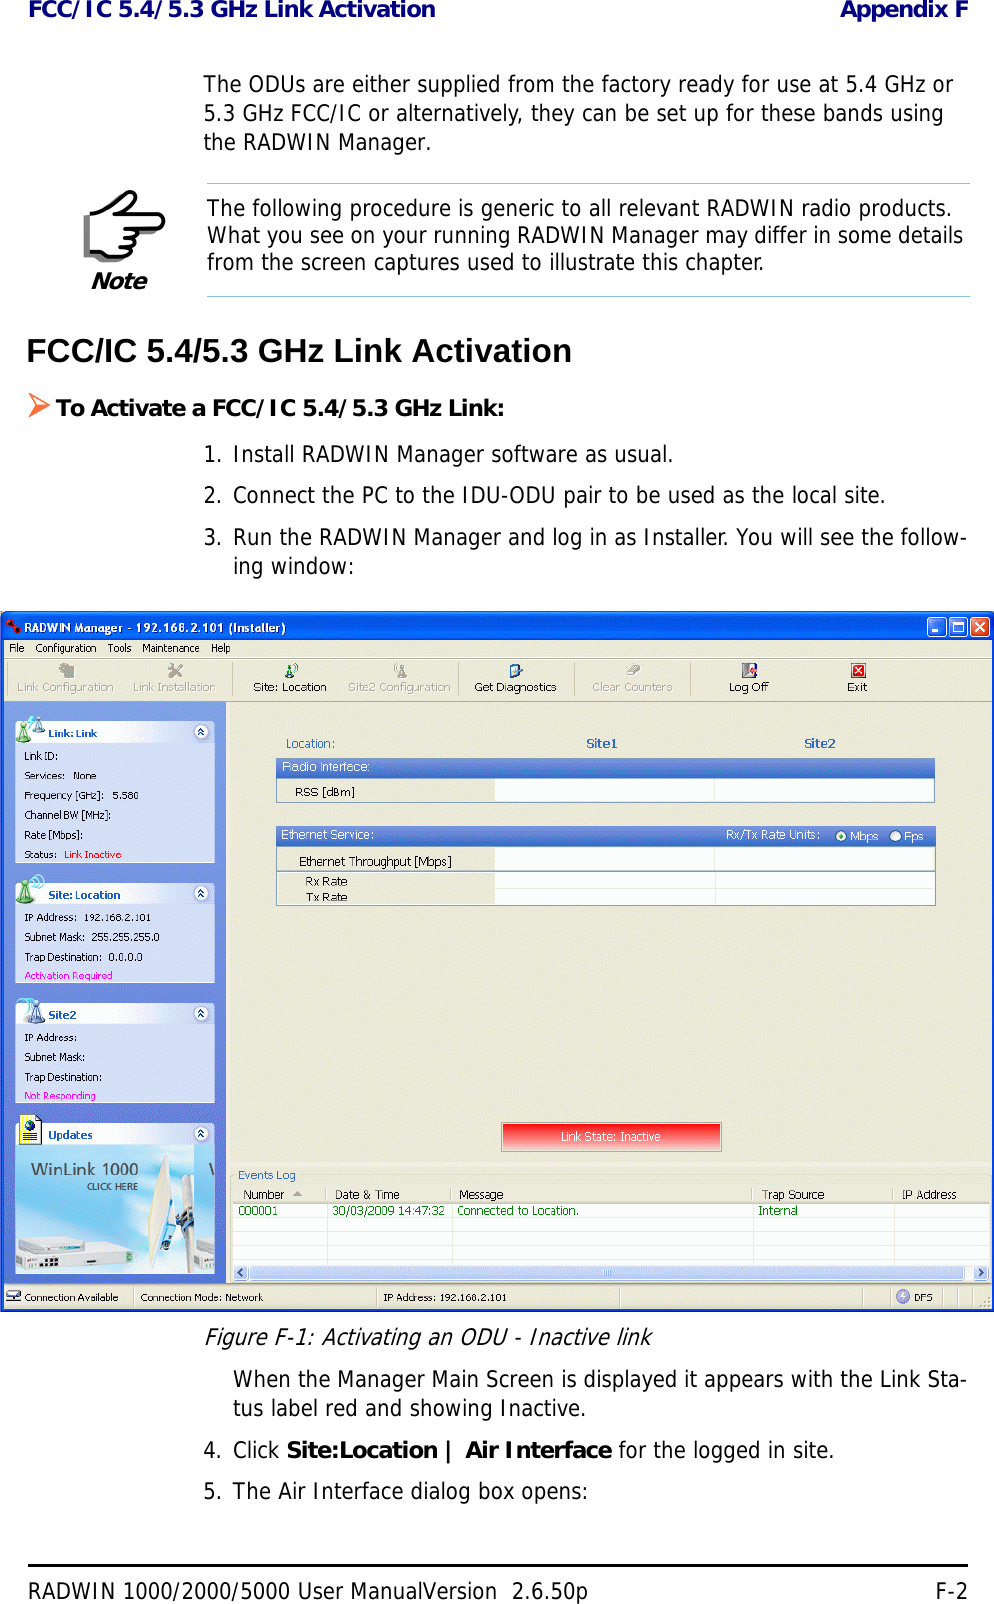 FCC/IC 5.4/5.3 GHz Link Activation Appendix FRADWIN 1000/2000/5000 User ManualVersion  2.6.50p F-2The ODUs are either supplied from the factory ready for use at 5.4 GHz or 5.3 GHz FCC/IC or alternatively, they can be set up for these bands using the RADWIN Manager.FCC/IC 5.4/5.3 GHz Link ActivationTo Activate a FCC/IC 5.4/5.3 GHz Link:1. Install RADWIN Manager software as usual.2. Connect the PC to the IDU-ODU pair to be used as the local site.3. Run the RADWIN Manager and log in as Installer. You will see the follow-ing window:Figure F-1: Activating an ODU - Inactive linkWhen the Manager Main Screen is displayed it appears with the Link Sta-tus label red and showing Inactive.4. Click Site:Location | Air Interface for the logged in site.5. The Air Interface dialog box opens:NoteThe following procedure is generic to all relevant RADWIN radio products. What you see on your running RADWIN Manager may differ in some details from the screen captures used to illustrate this chapter.